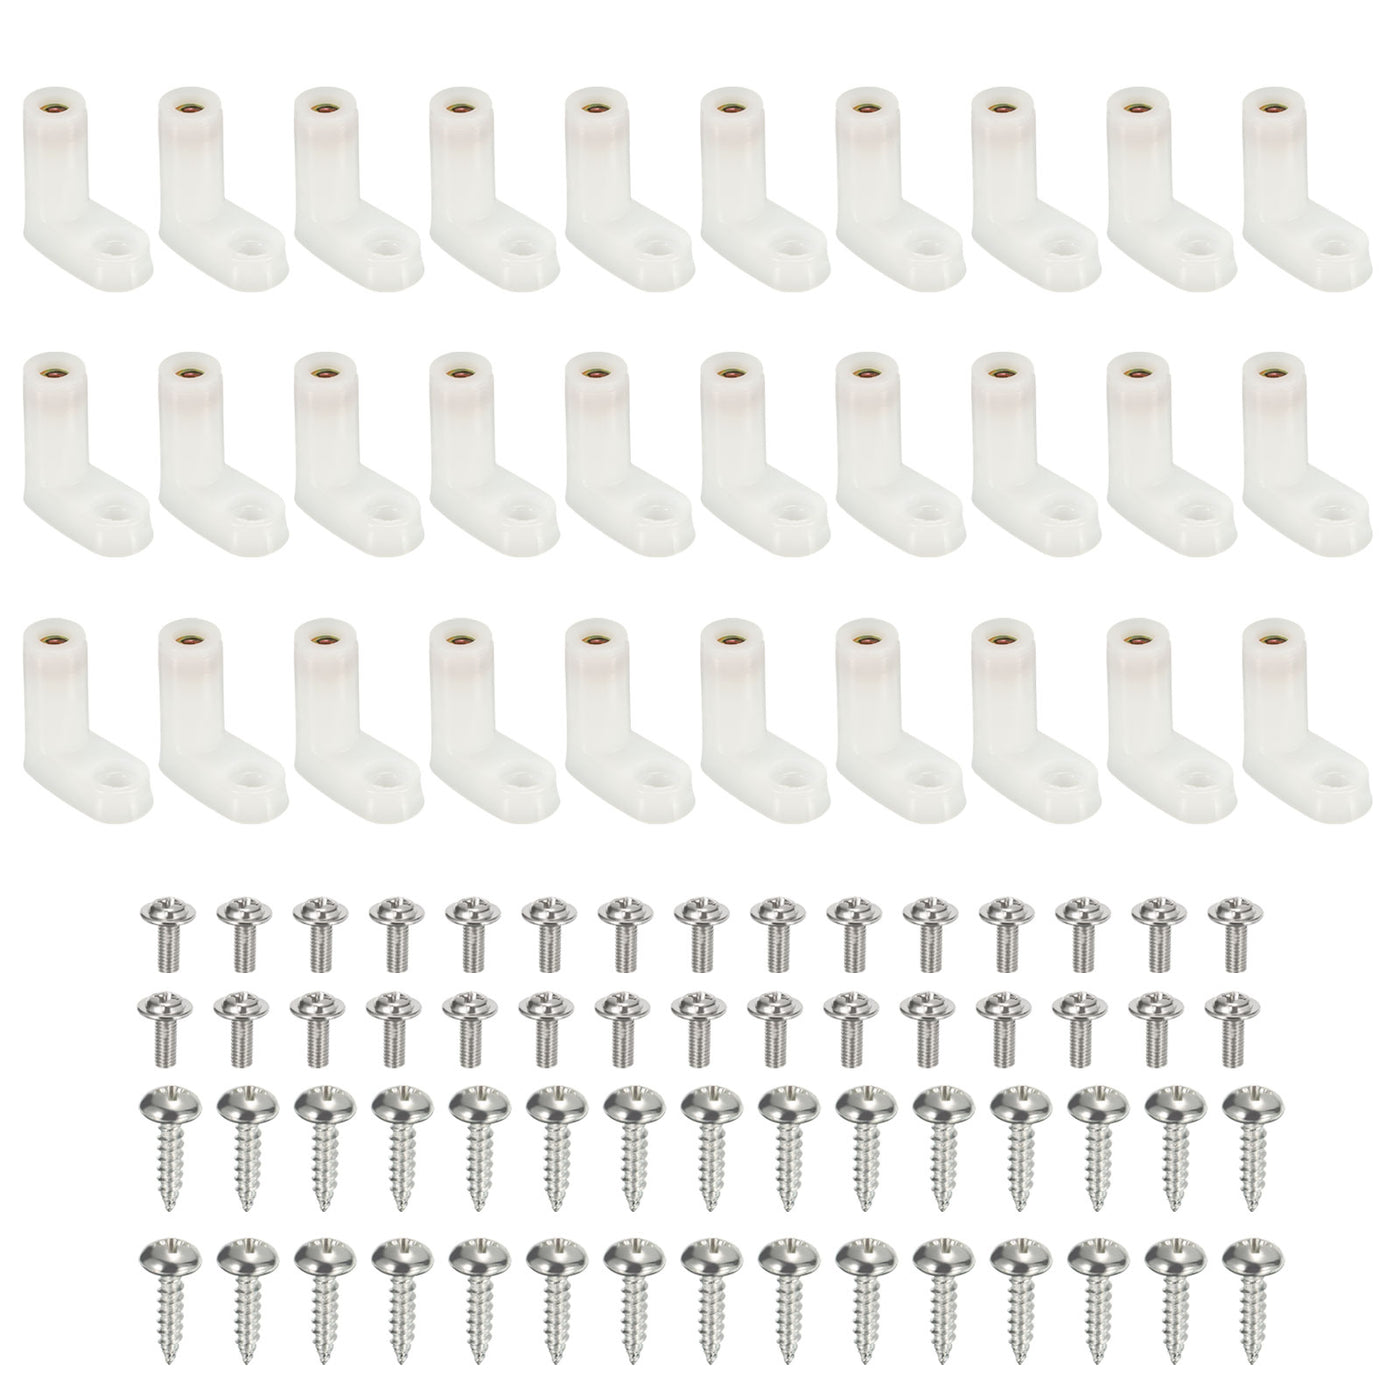 uxcell Uxcell 120 Pcs Circuit Board L Shape Insulated PCB Spacer 20mm Standoffs Mounting Feet Supporting Height with Screws White